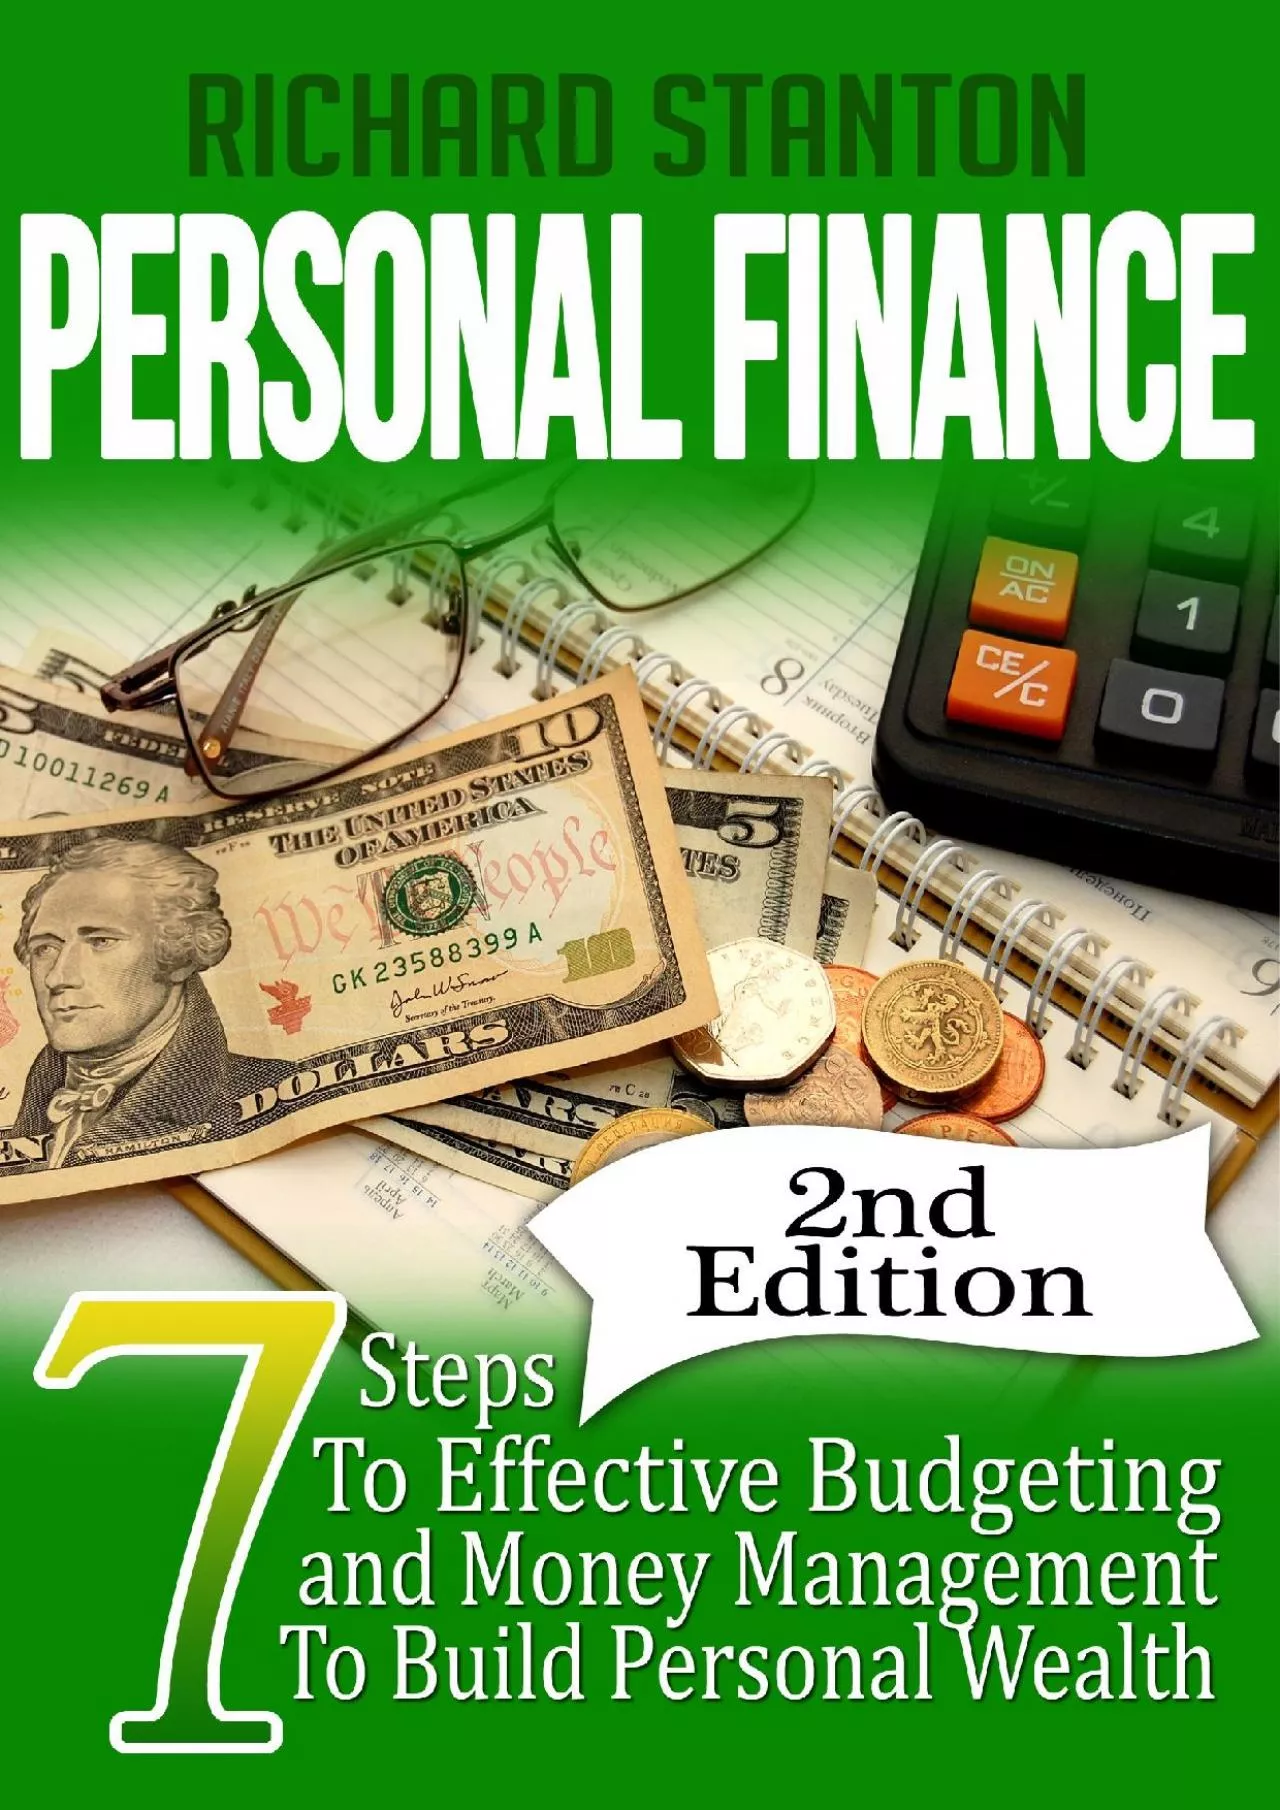 Personal Finance: 7 Steps To Effective Budgeting and Money Management To Build Personal